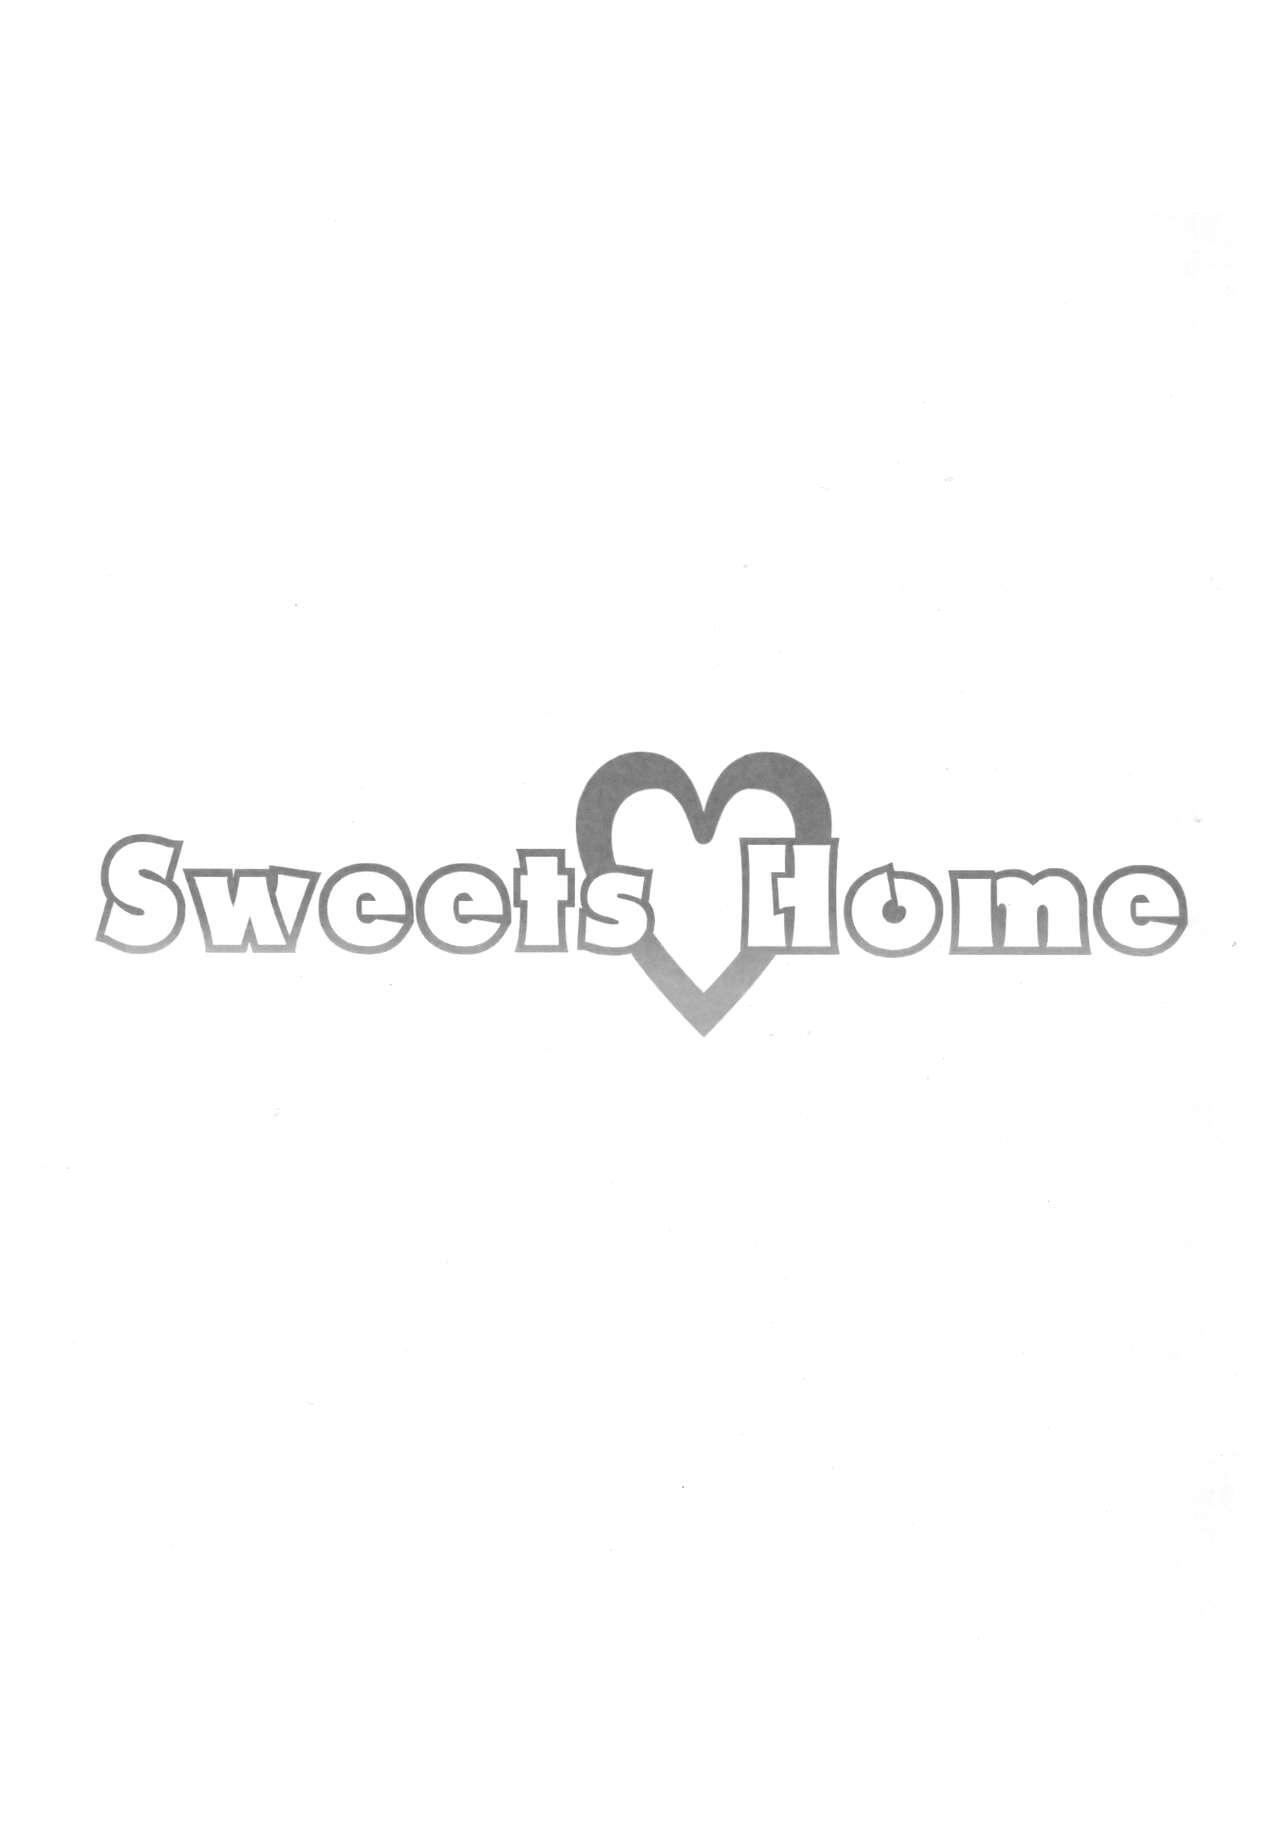 Sweets Home 2